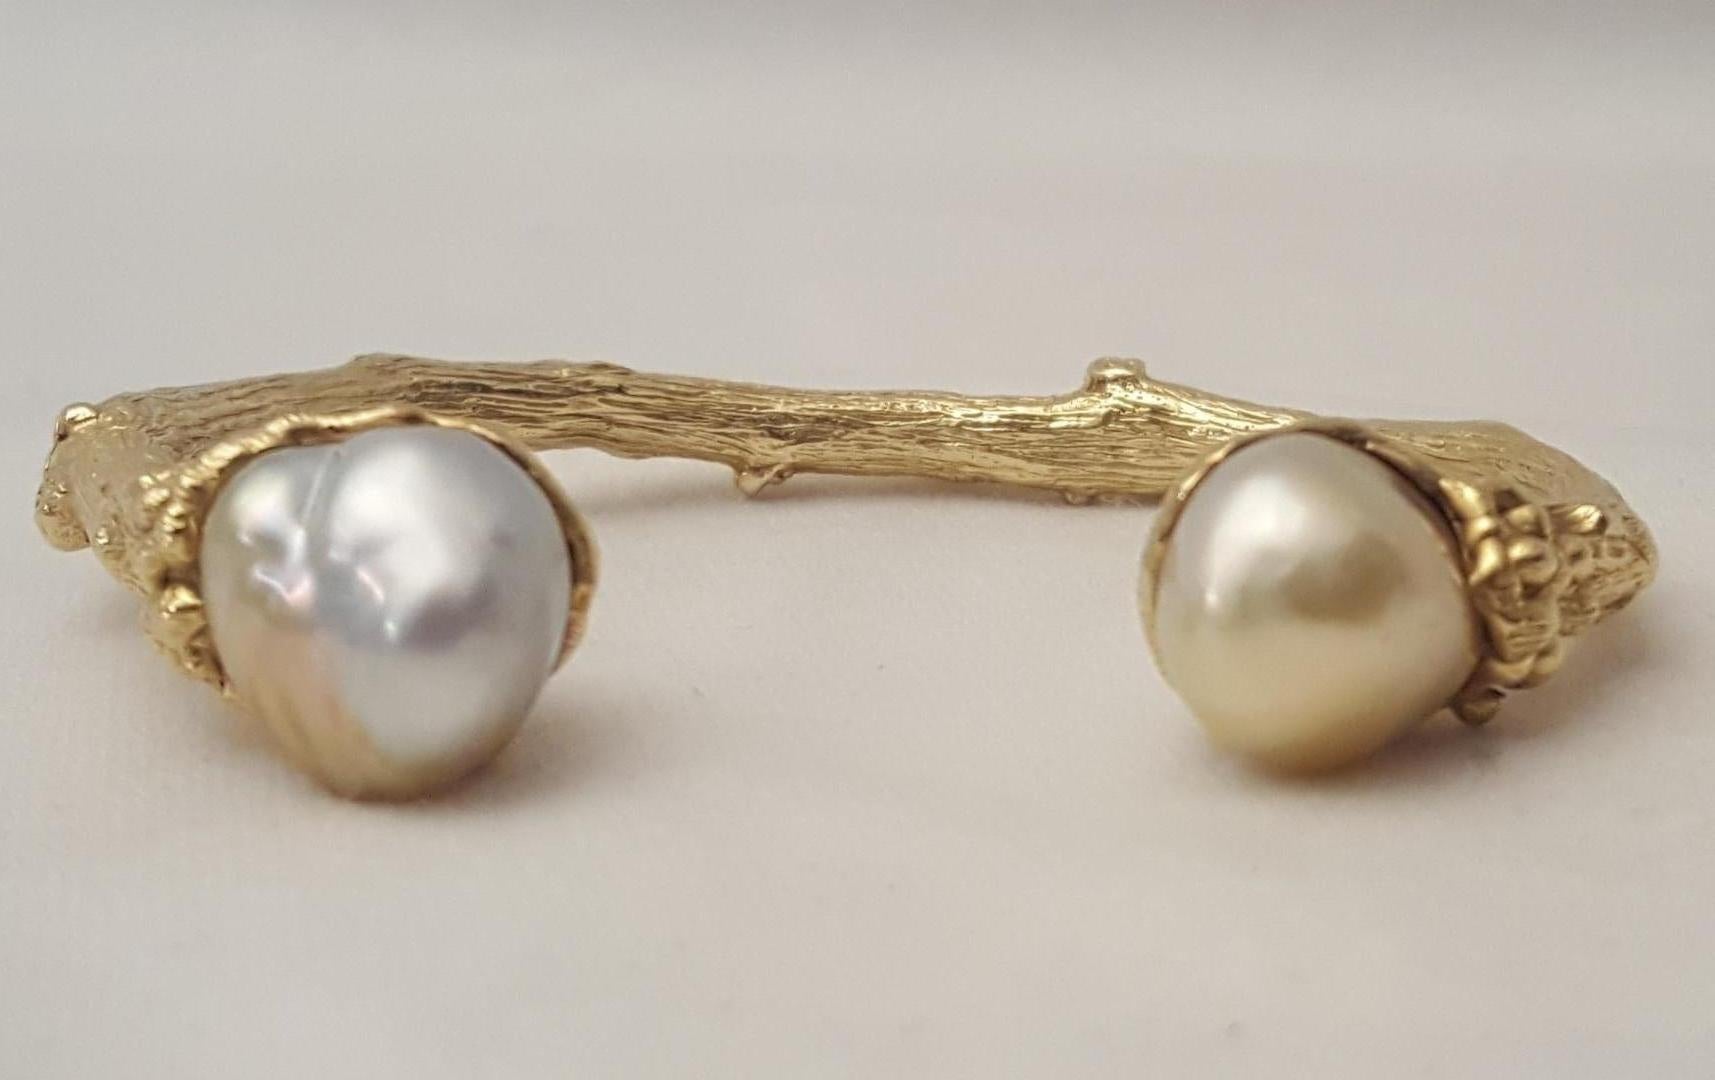 Stunning bracelet crafted in 18 karat yellow gold, from the Twig Collection of K. Brunini.  This piece is Solid, weighing in at an impressive 50.5 grams!  A curved, heavily detailed 'branch' design curves upward to present two baroque pearls sitting